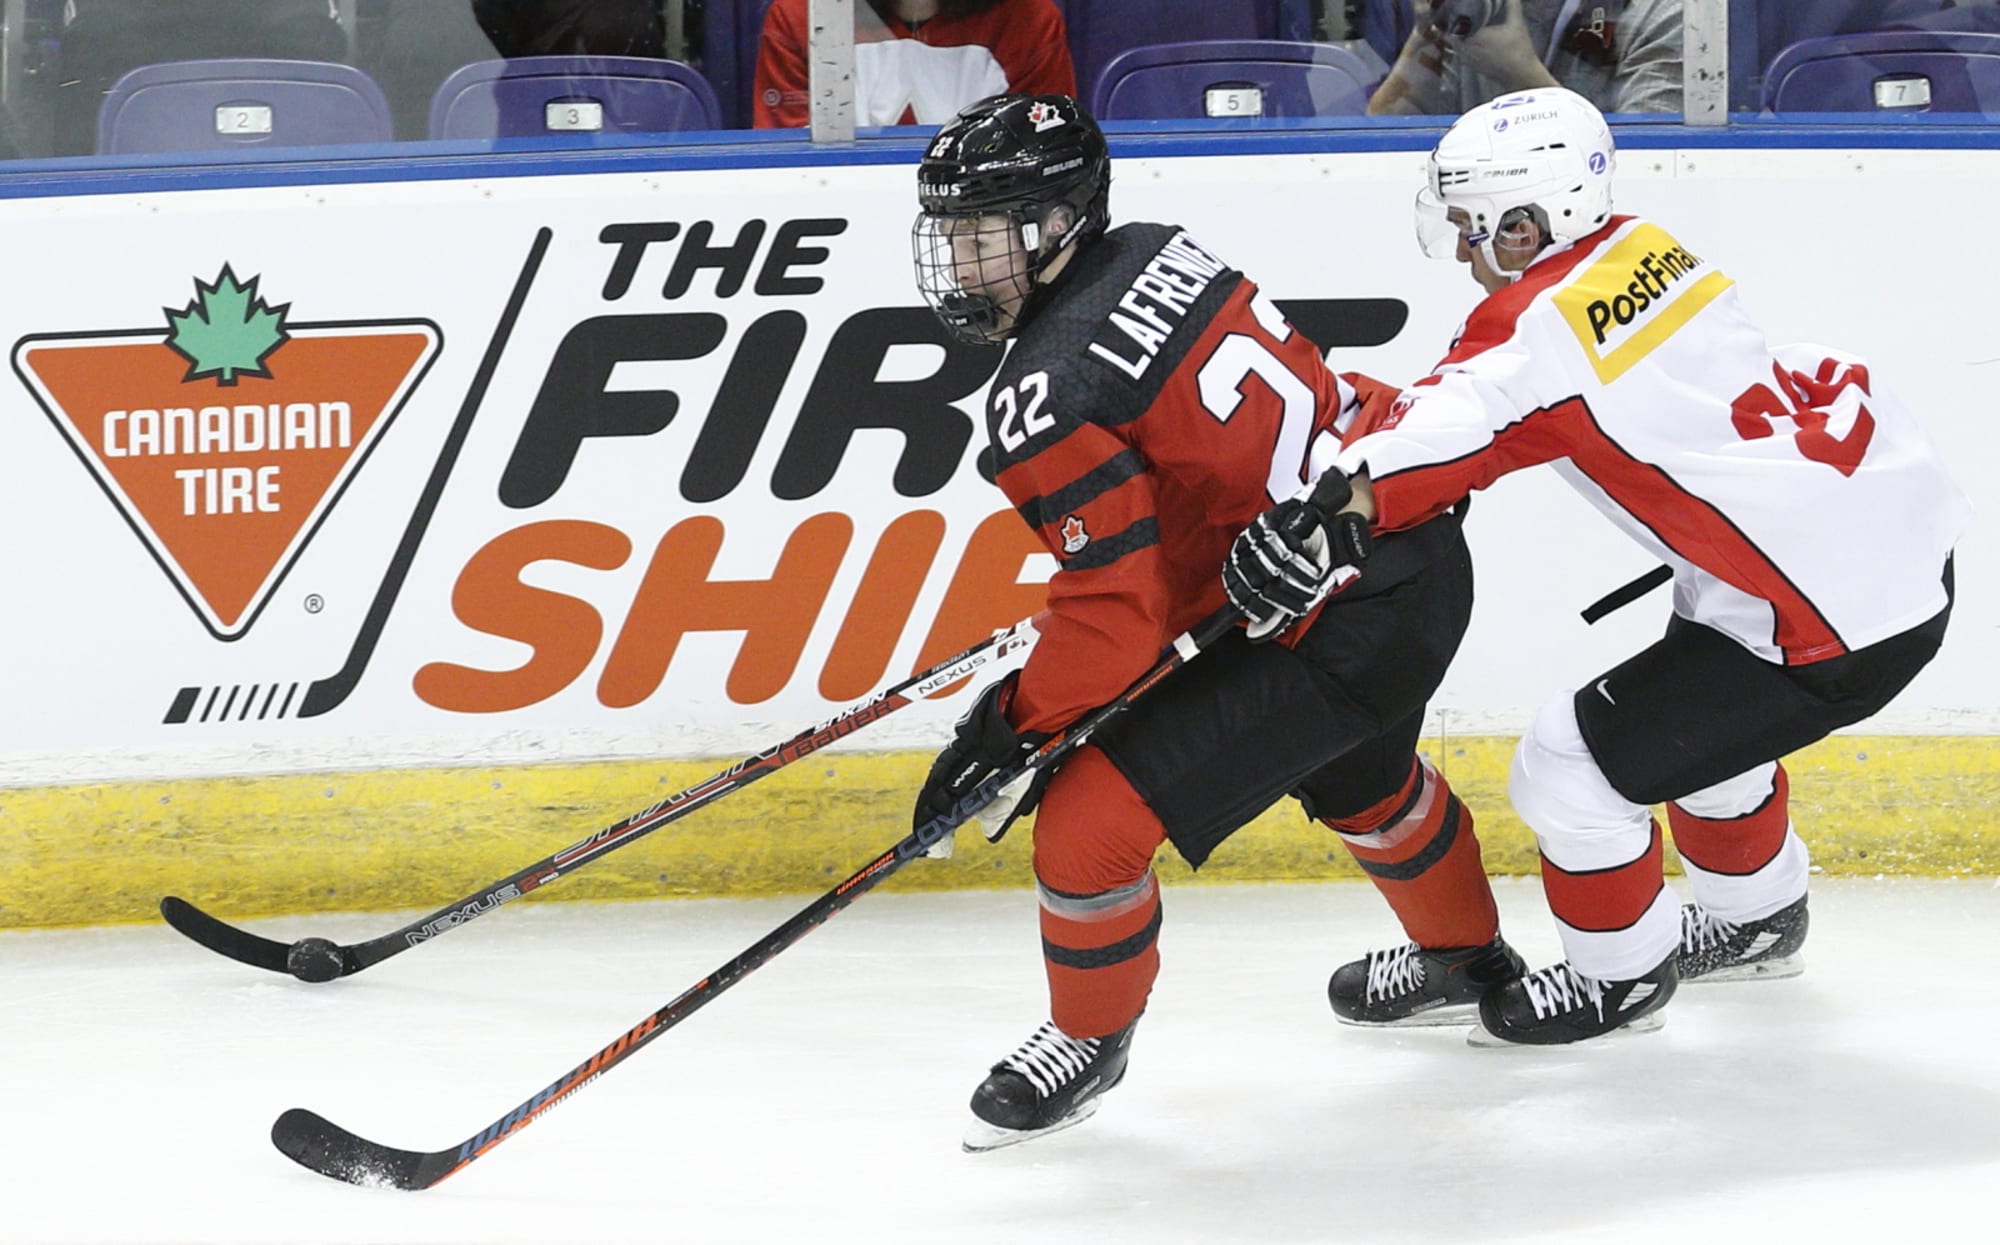 Canada junior star Lafreniere first among draft-eligible North